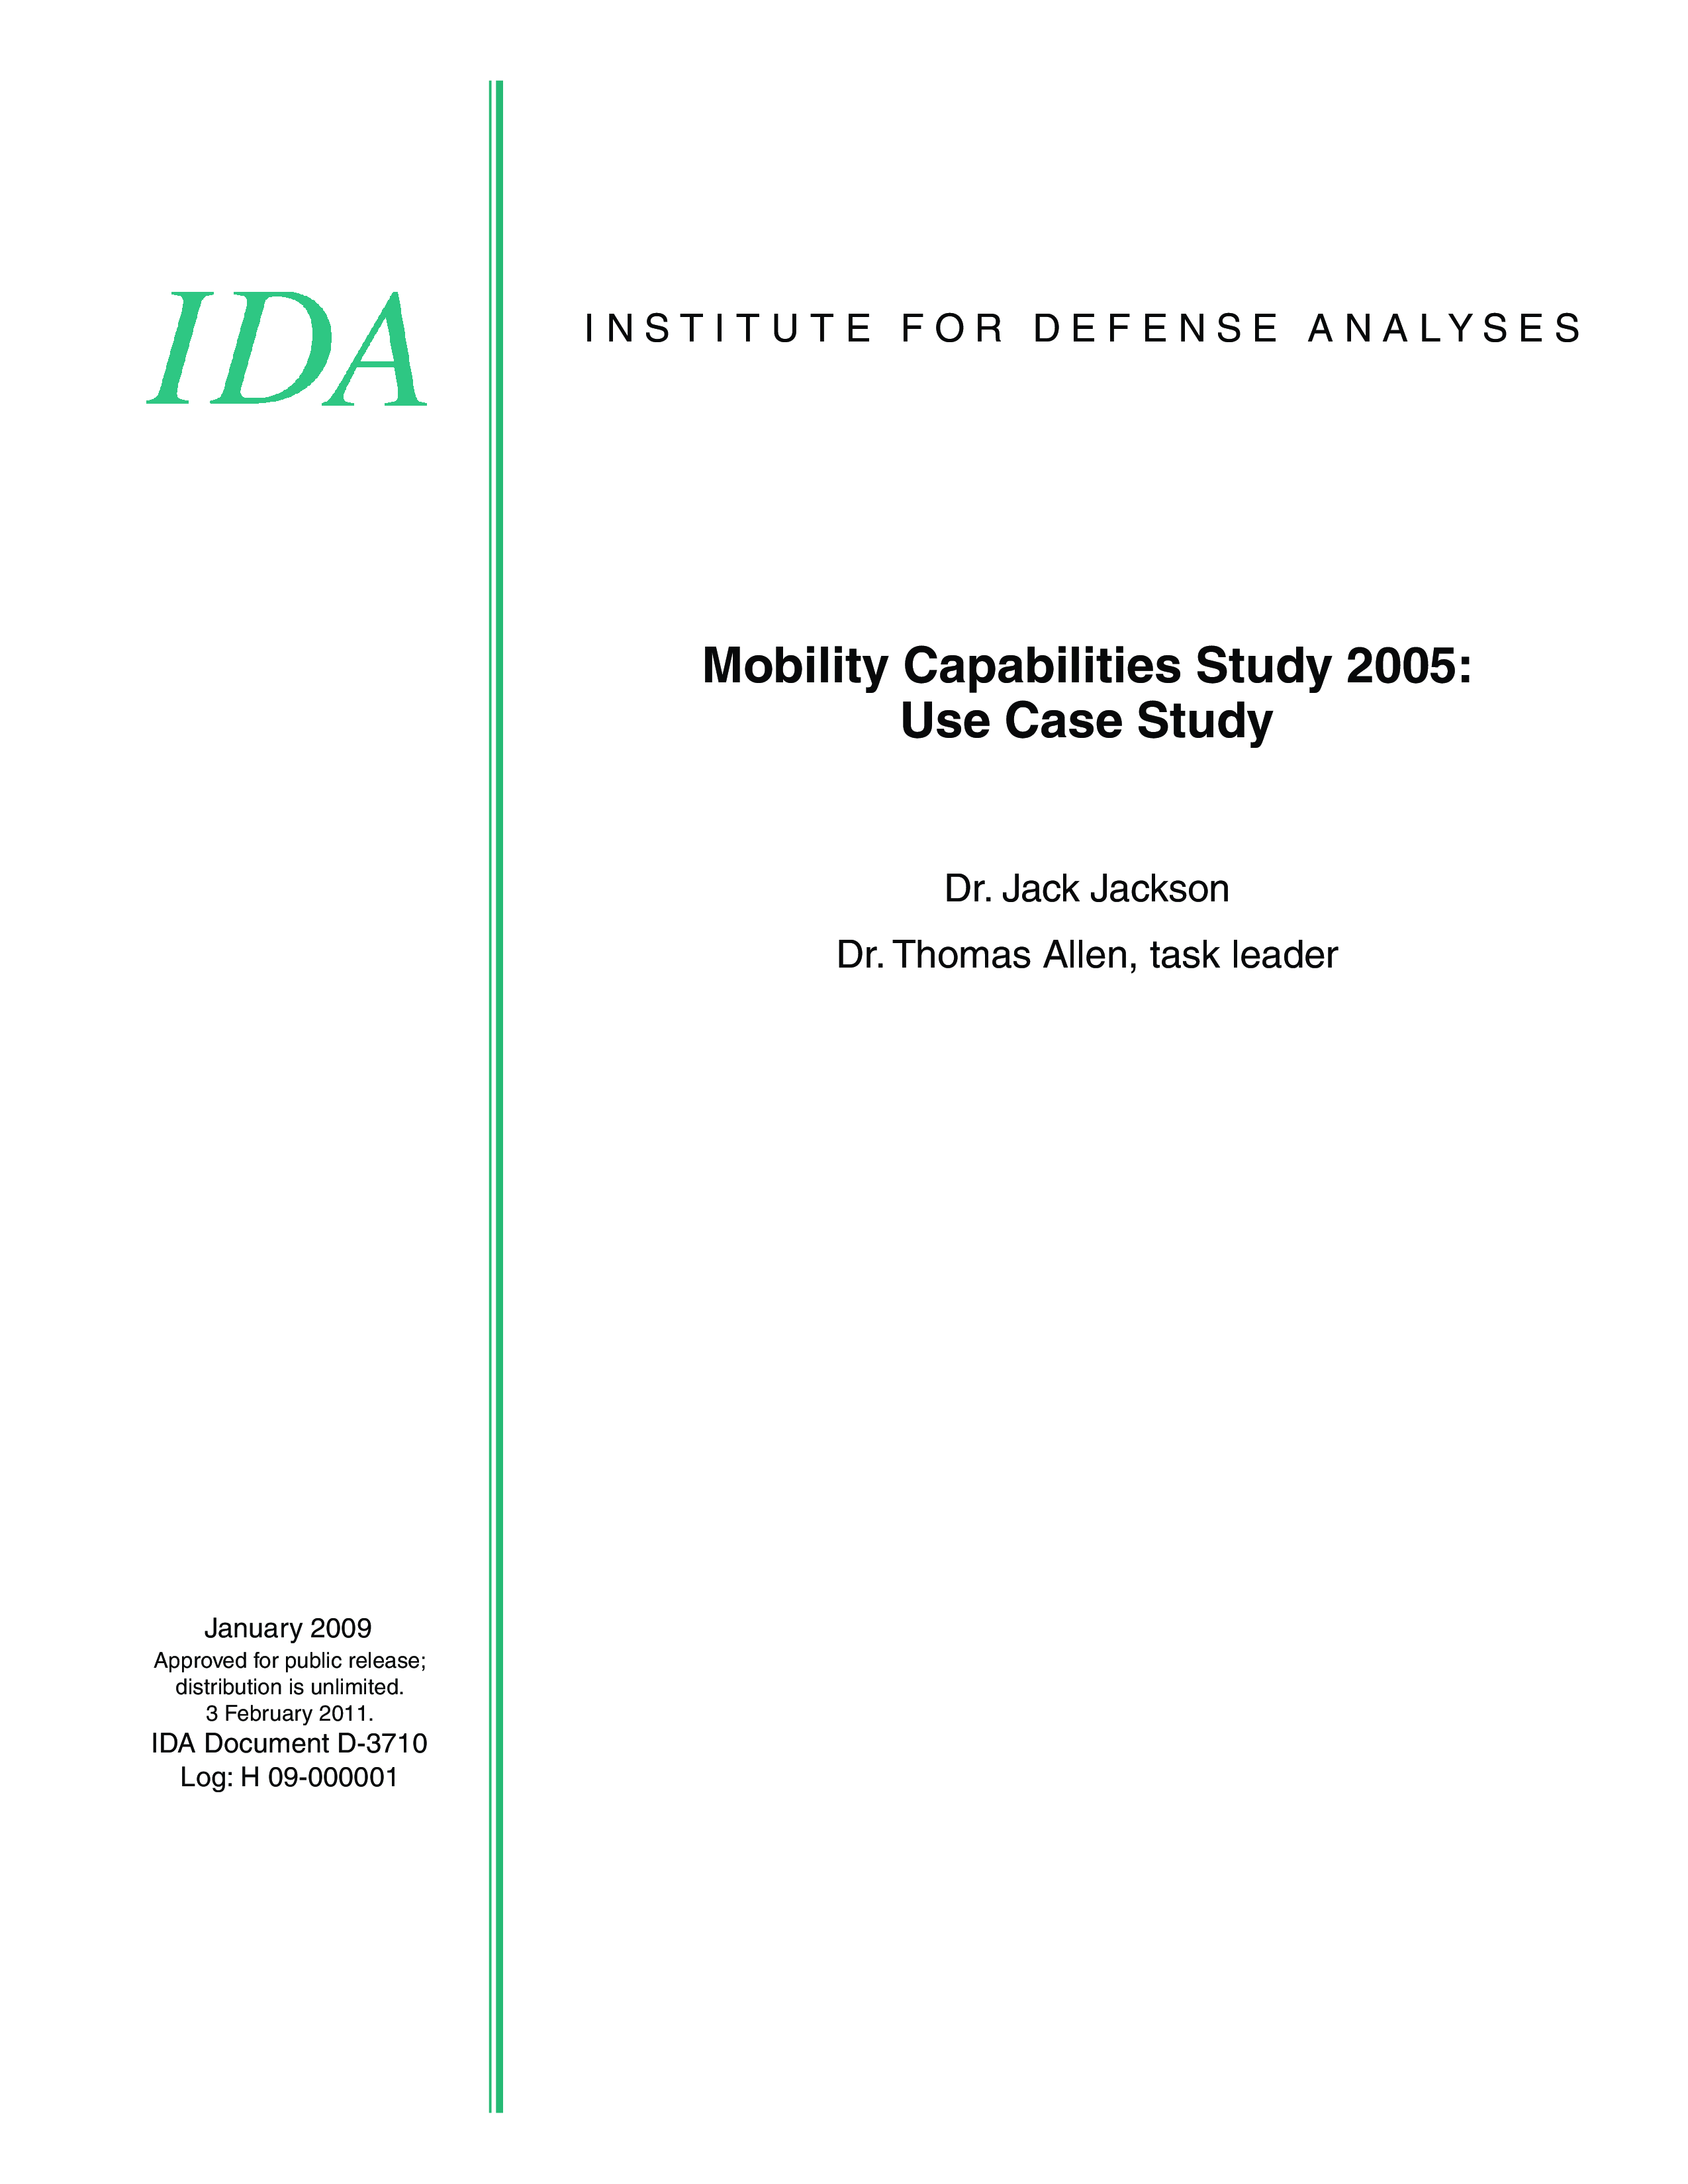 Mobility Capabilities Study 2005: Use Case Study